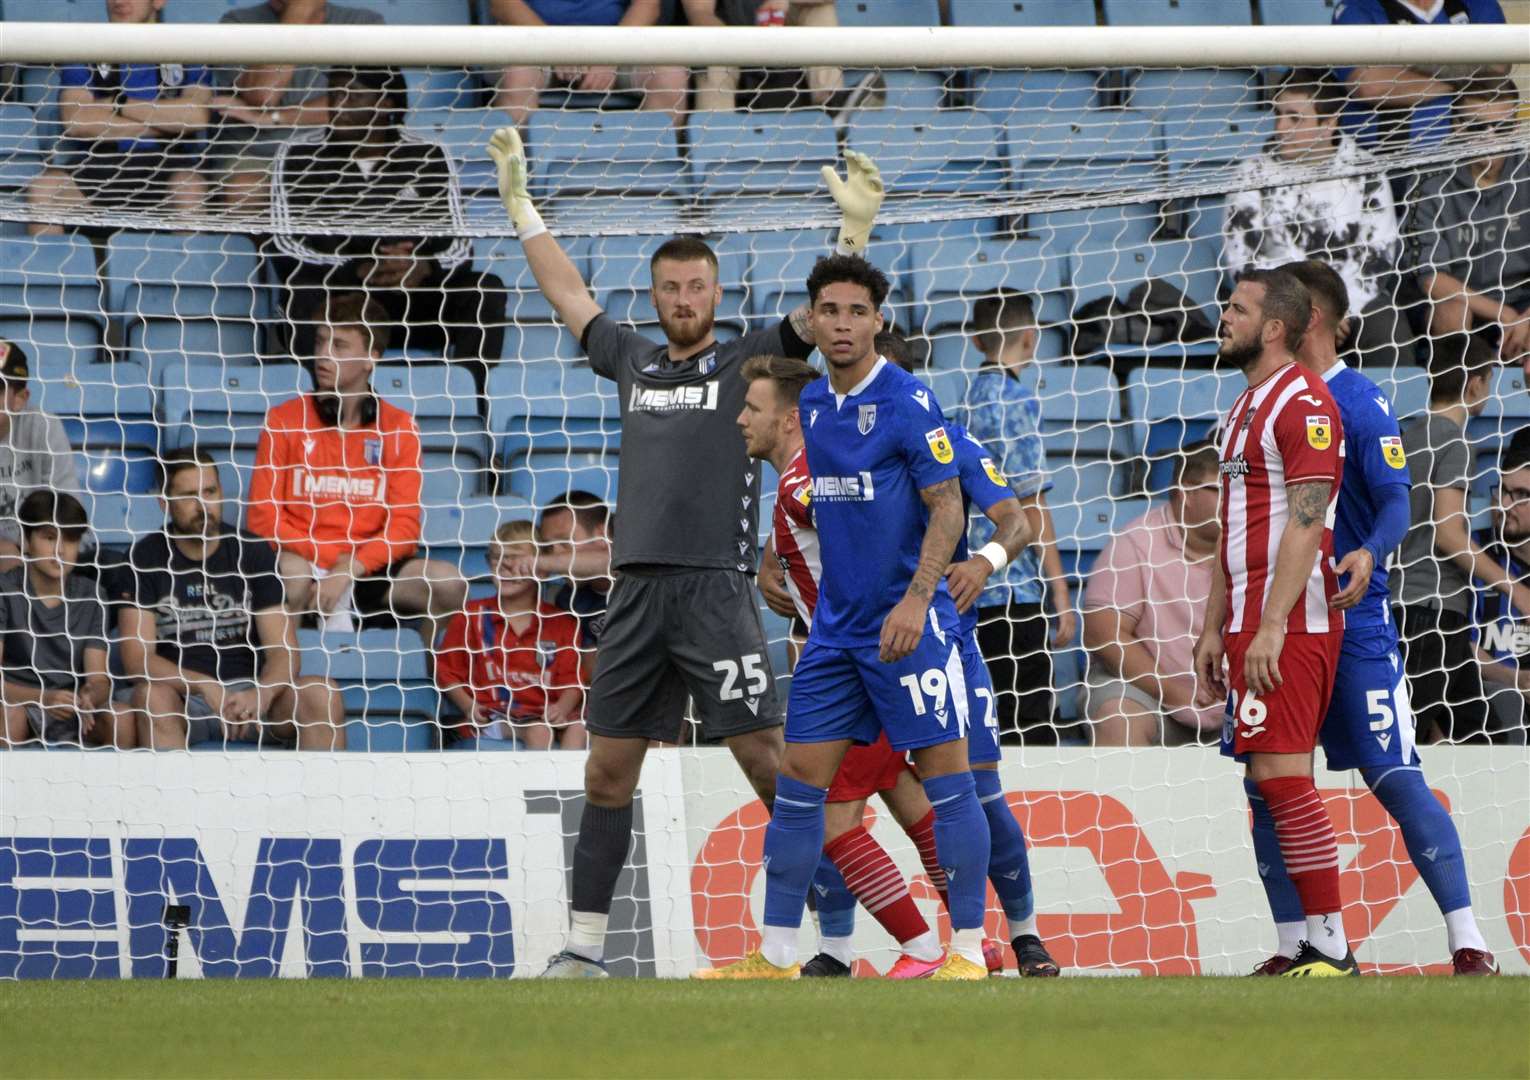 Keeper Jake Turner in goal for Gillingham against Exeter City. Picture: Barry Goodwin